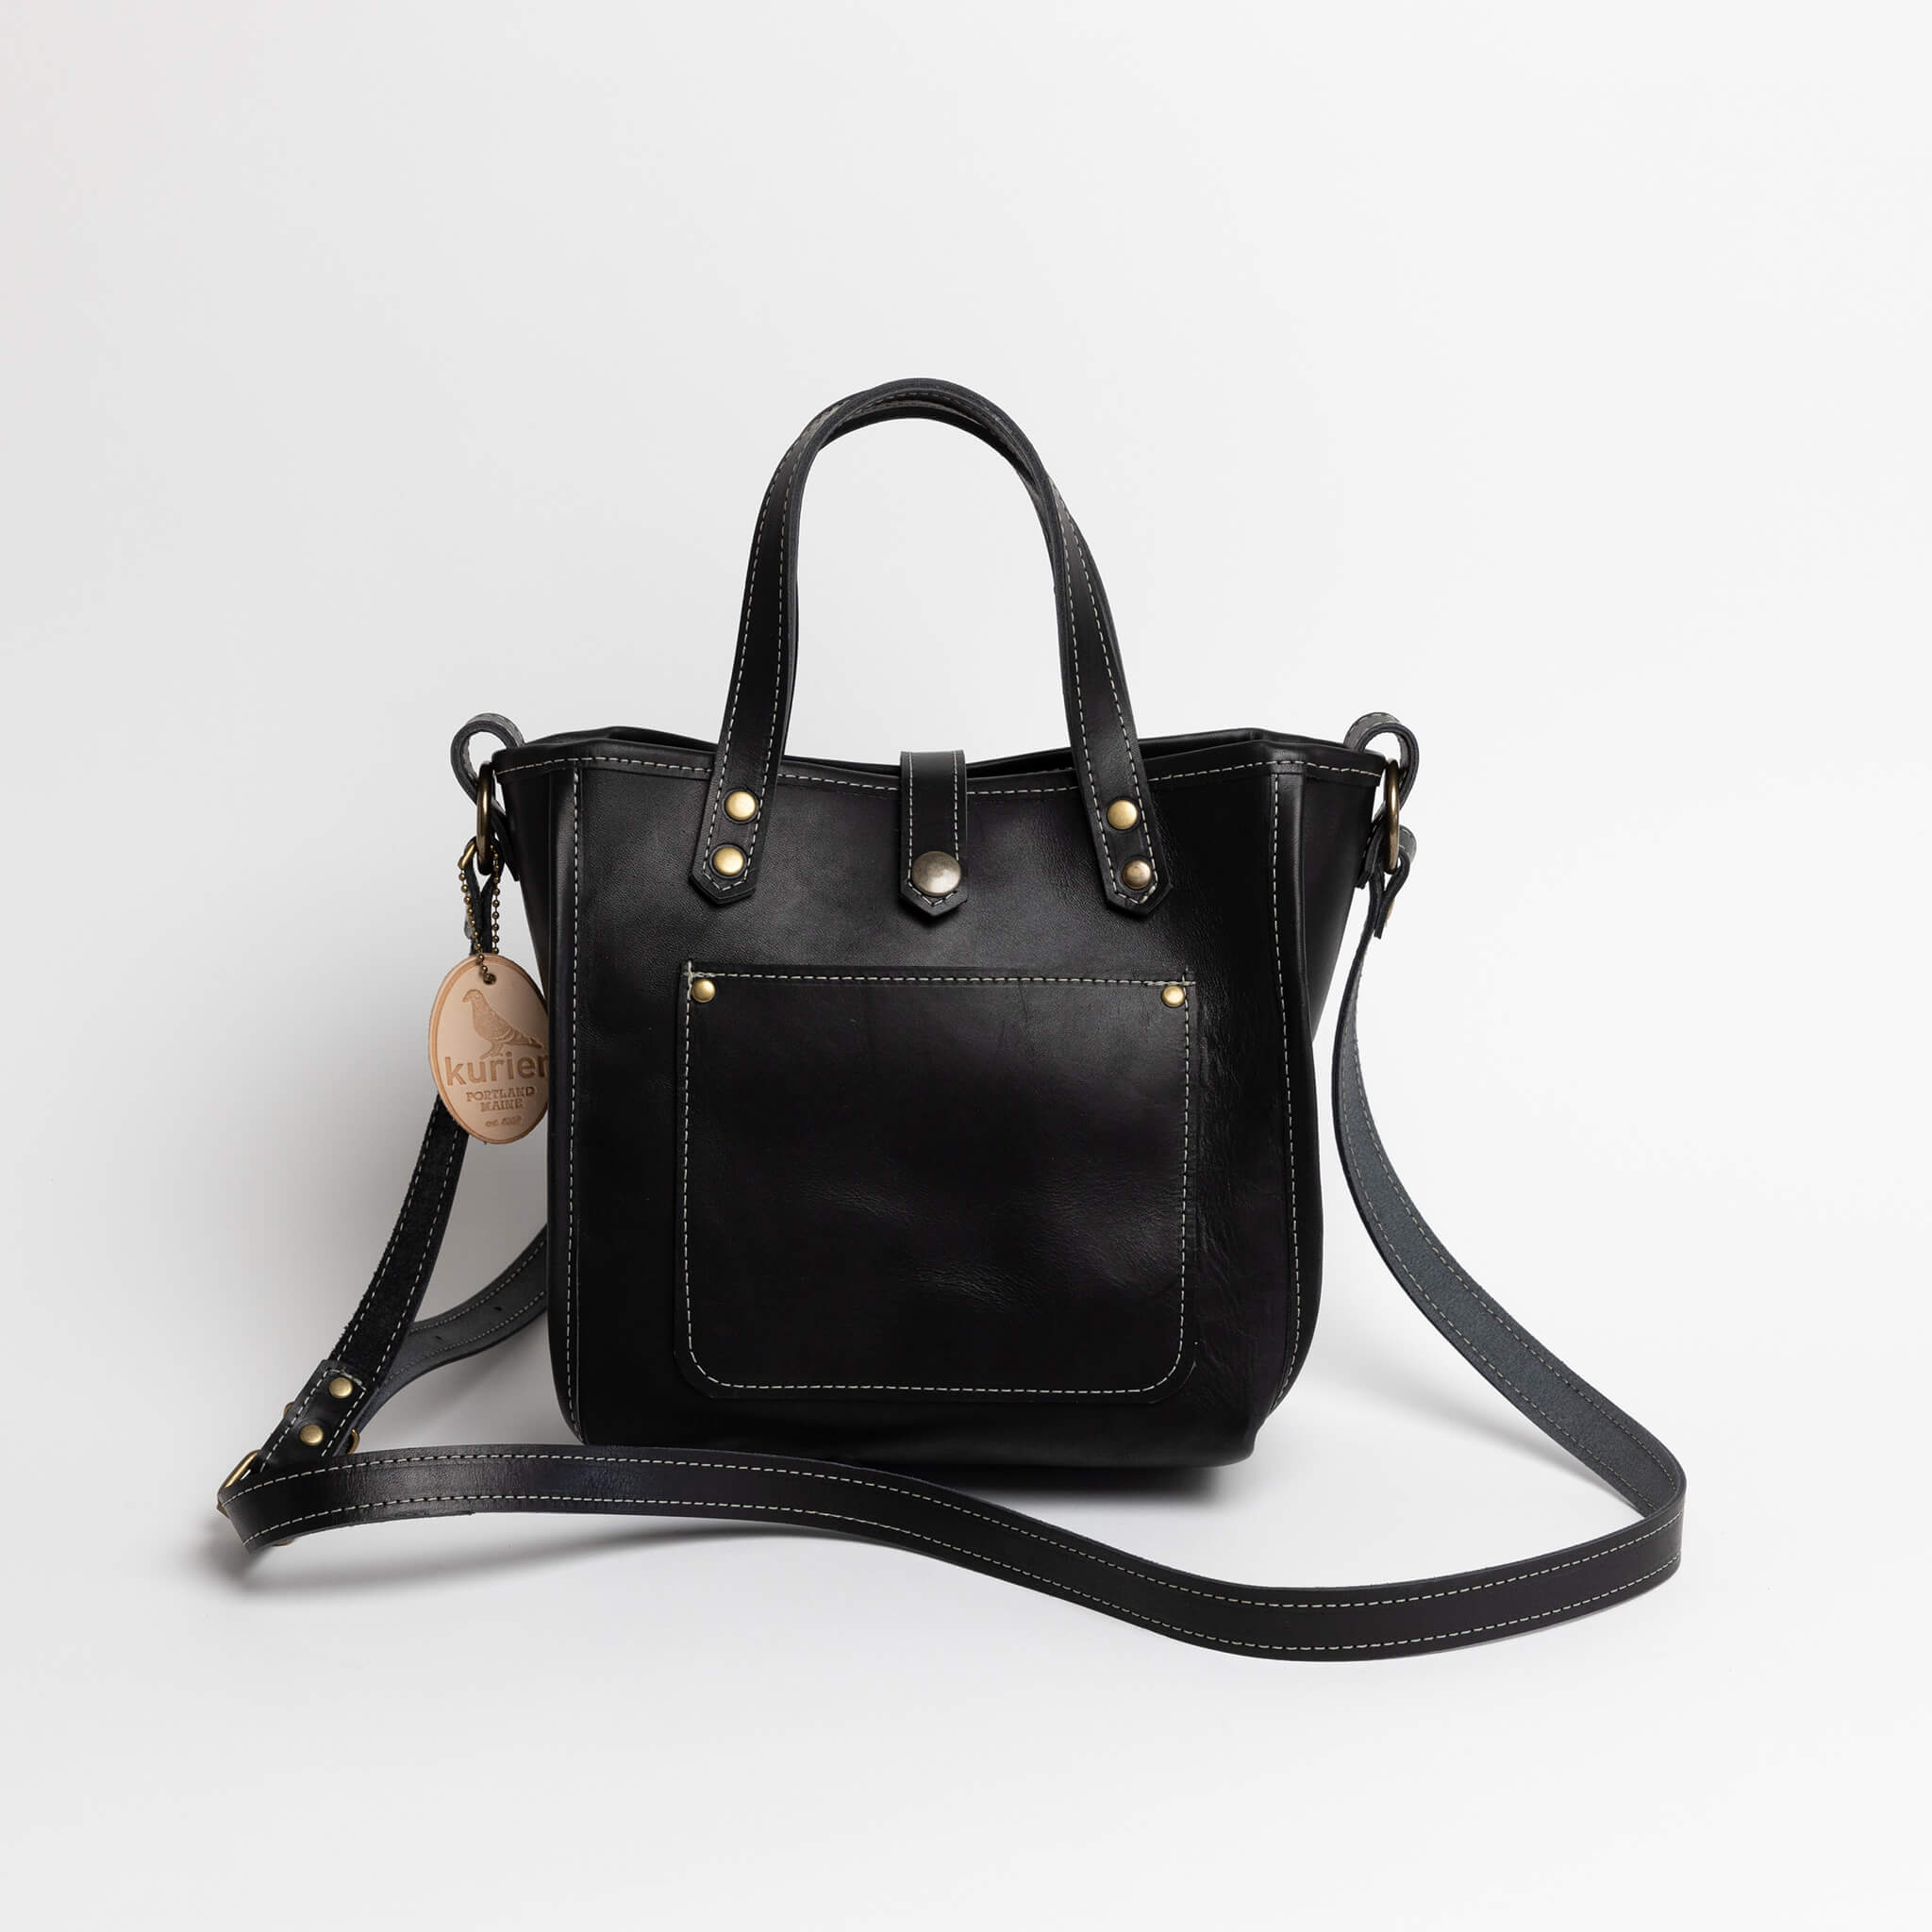 belfast tote crossbody compact - handmade leather - coal front view